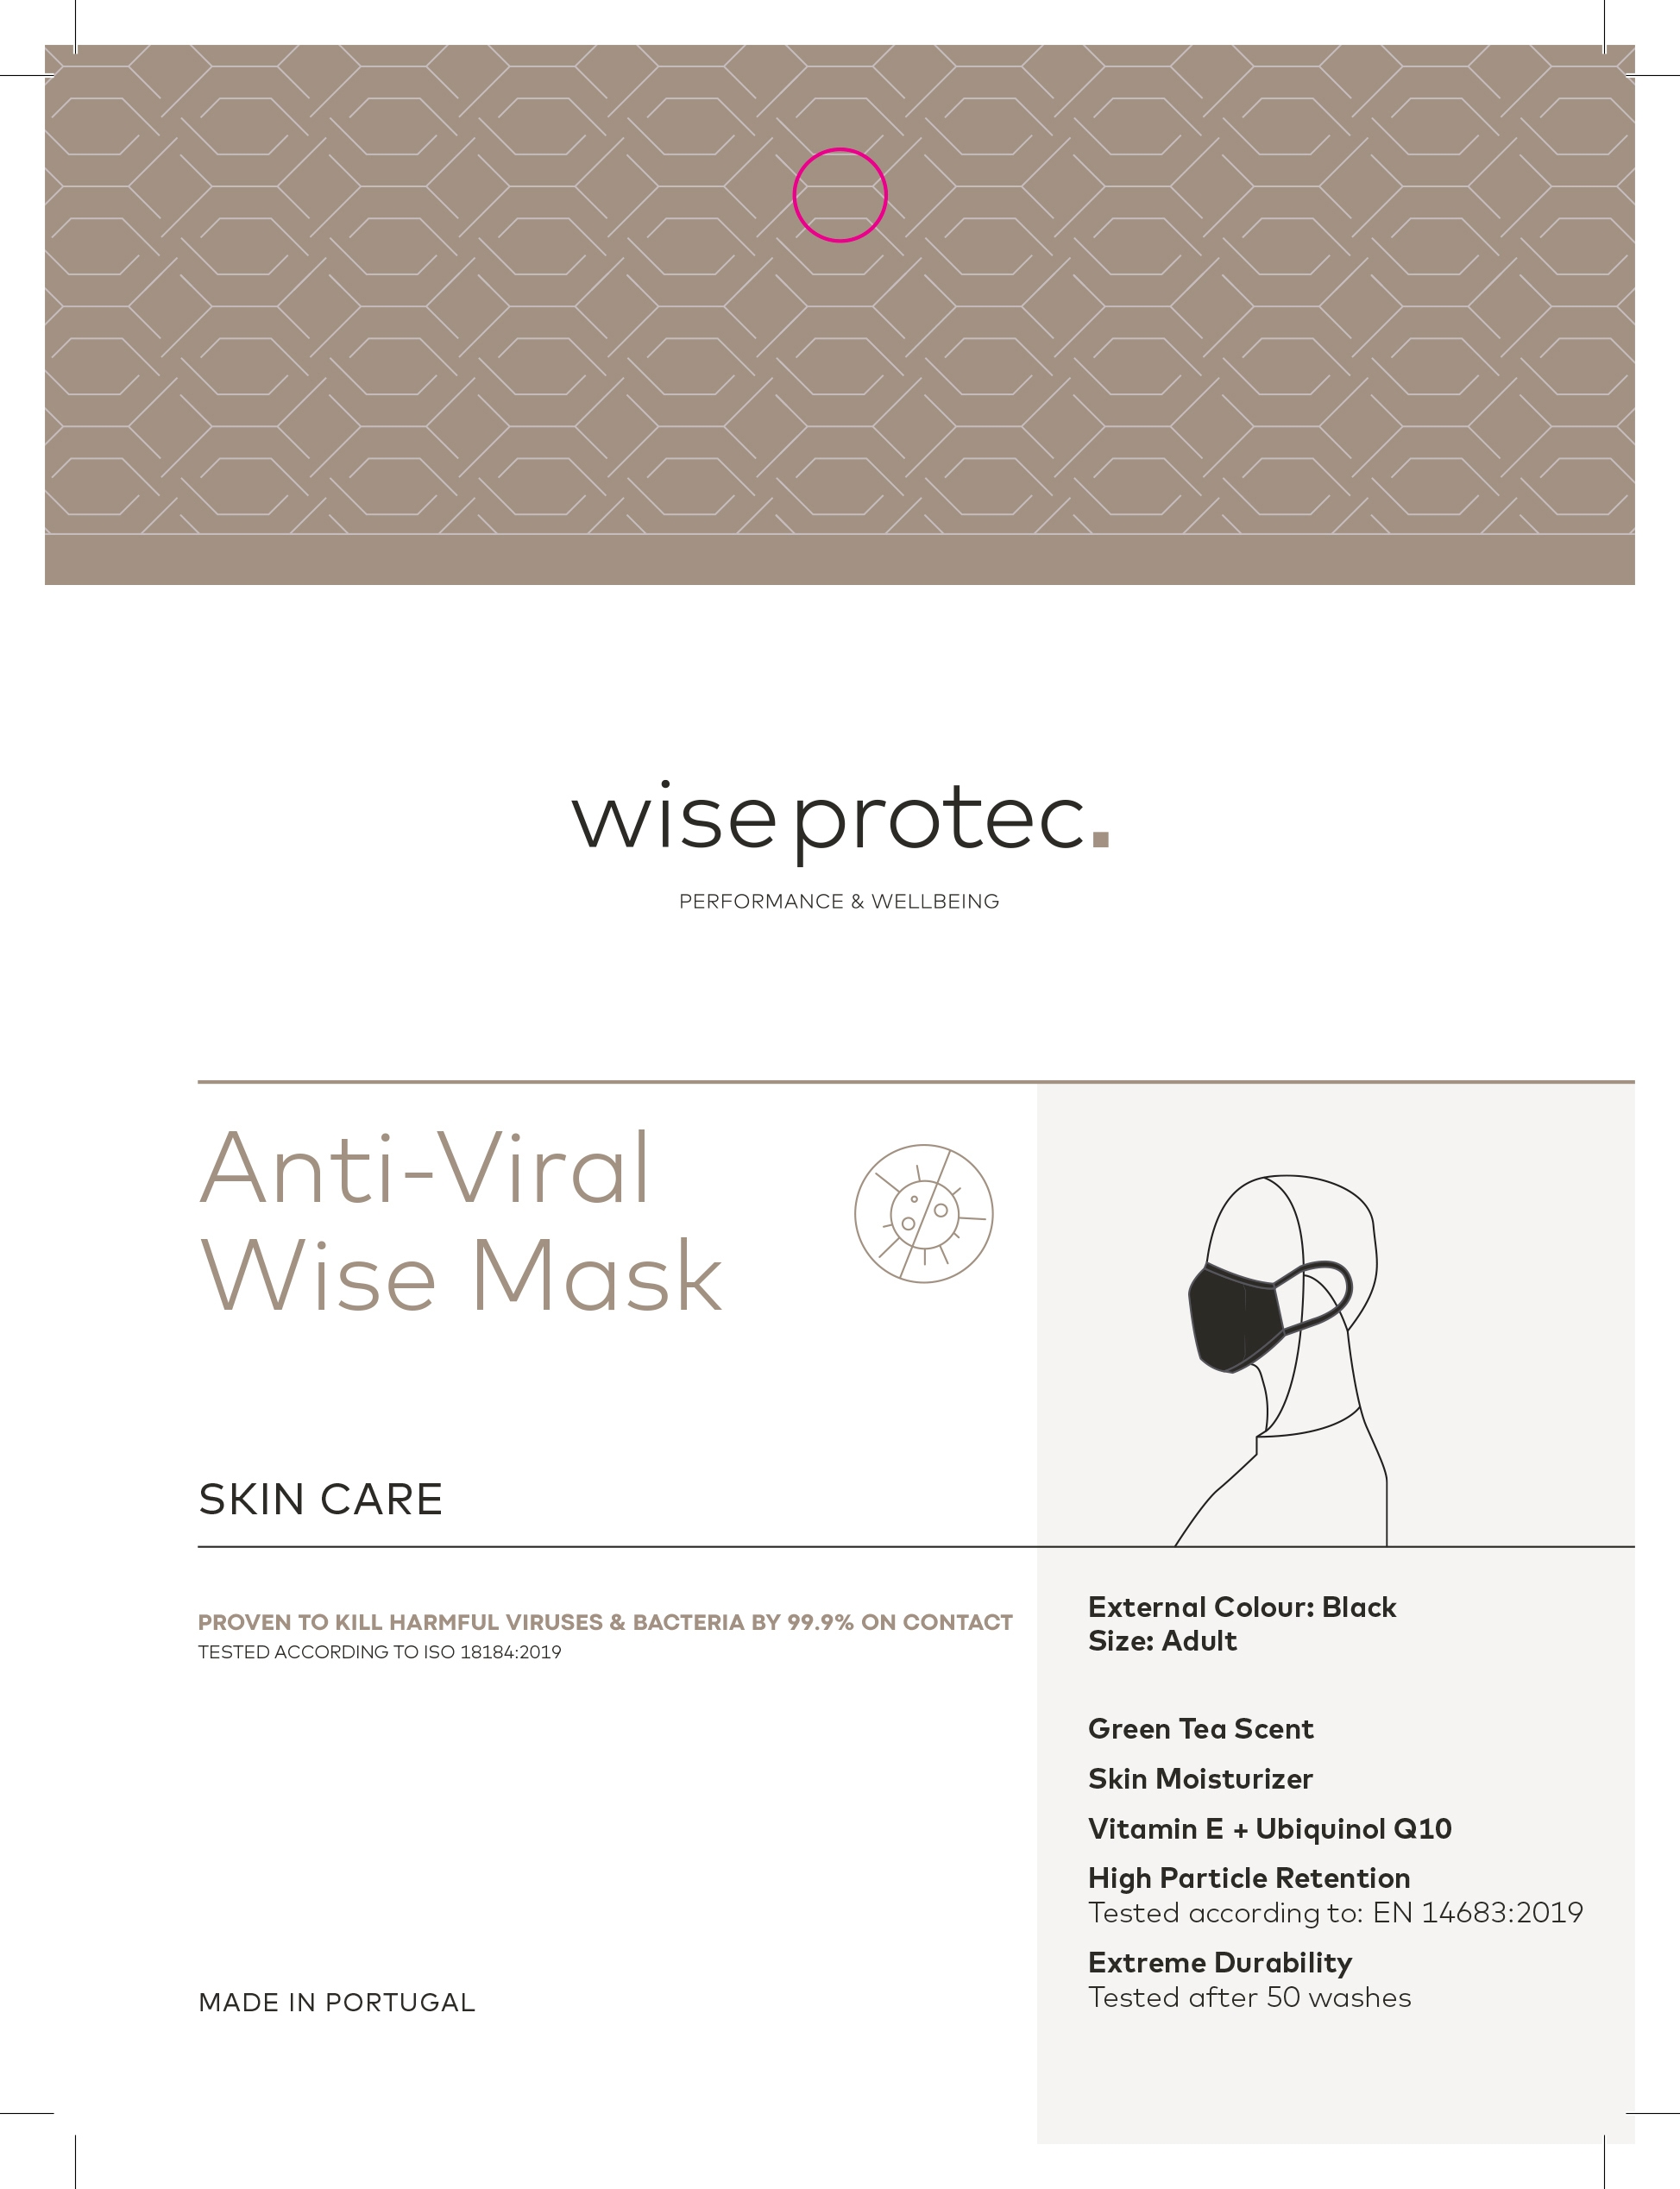 Wiseprotec | Wise Protec Unisex Skin Care Face Mask | Infused with Vitamin E, Ubiquinol Q10 & Green Tea Scent | Skin stays Moisturised | Washable & Reusable 50 times 5